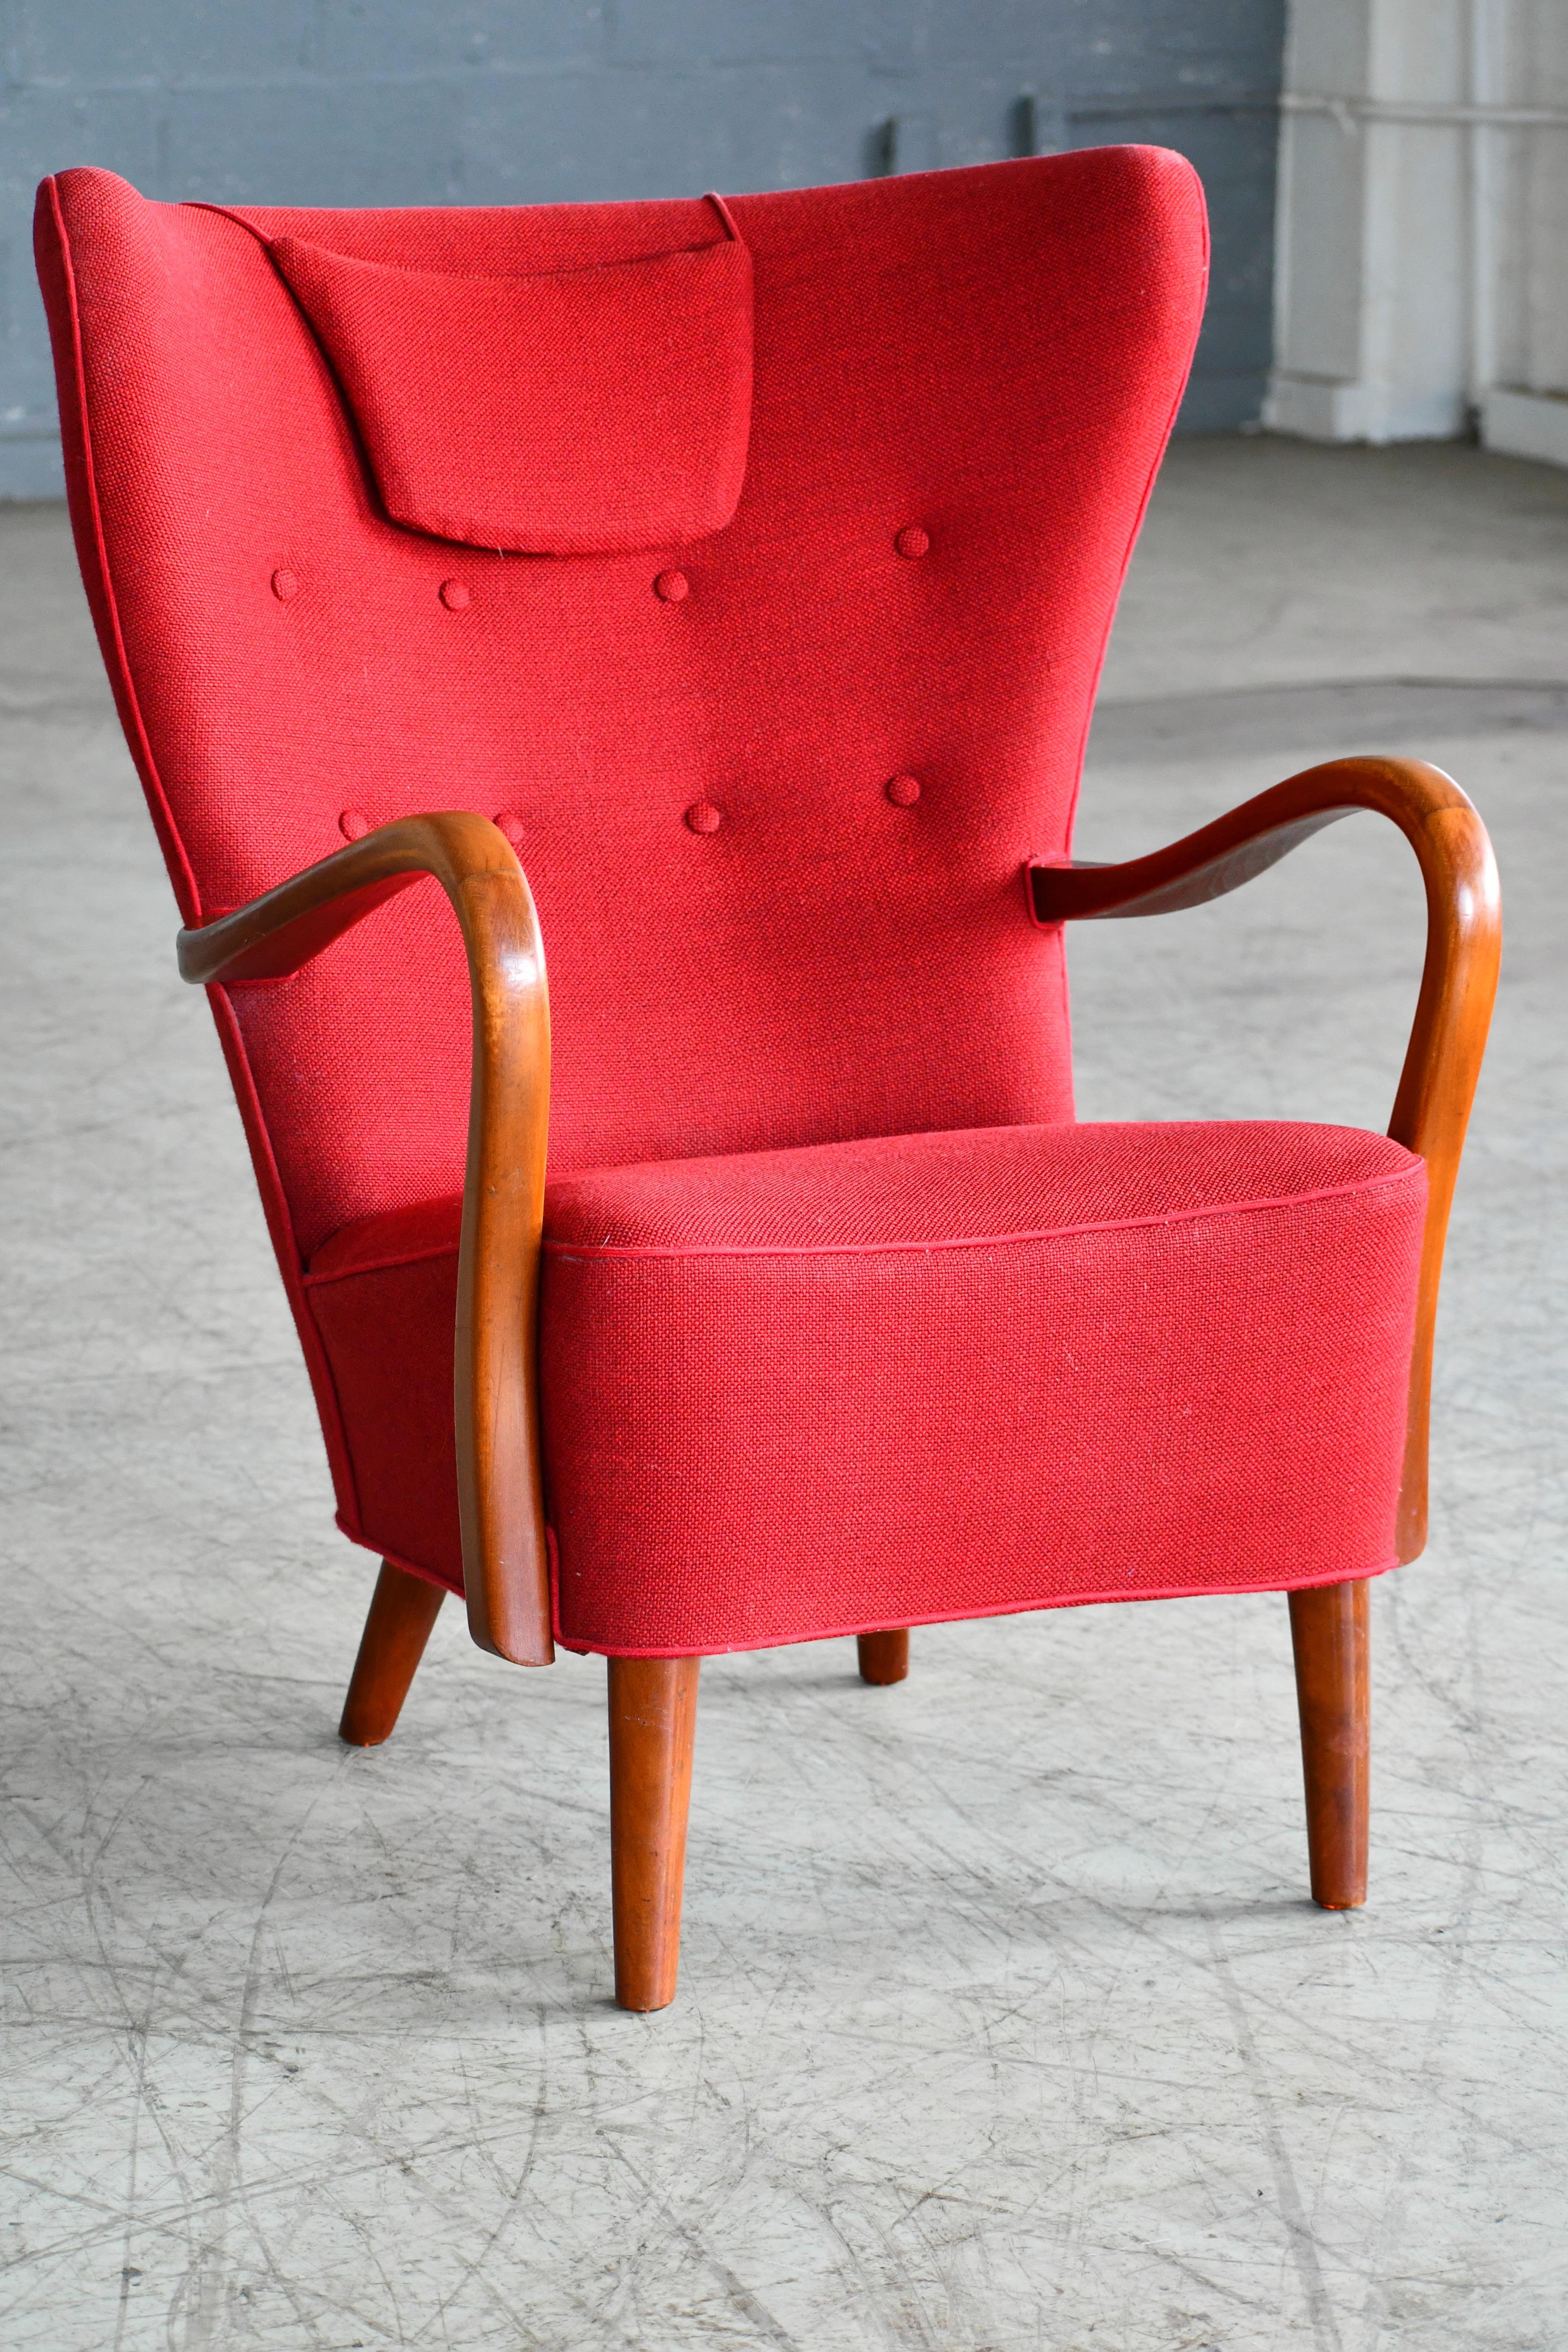 Classic elegant Danish high back armchair from the 1940s by Alfred Christensen for Slagelse Mobelvaerk with open armrests in beautifully curved stained beech. Nice slim elegant silhouette. Solid and sturdy construction with the fabric in clean